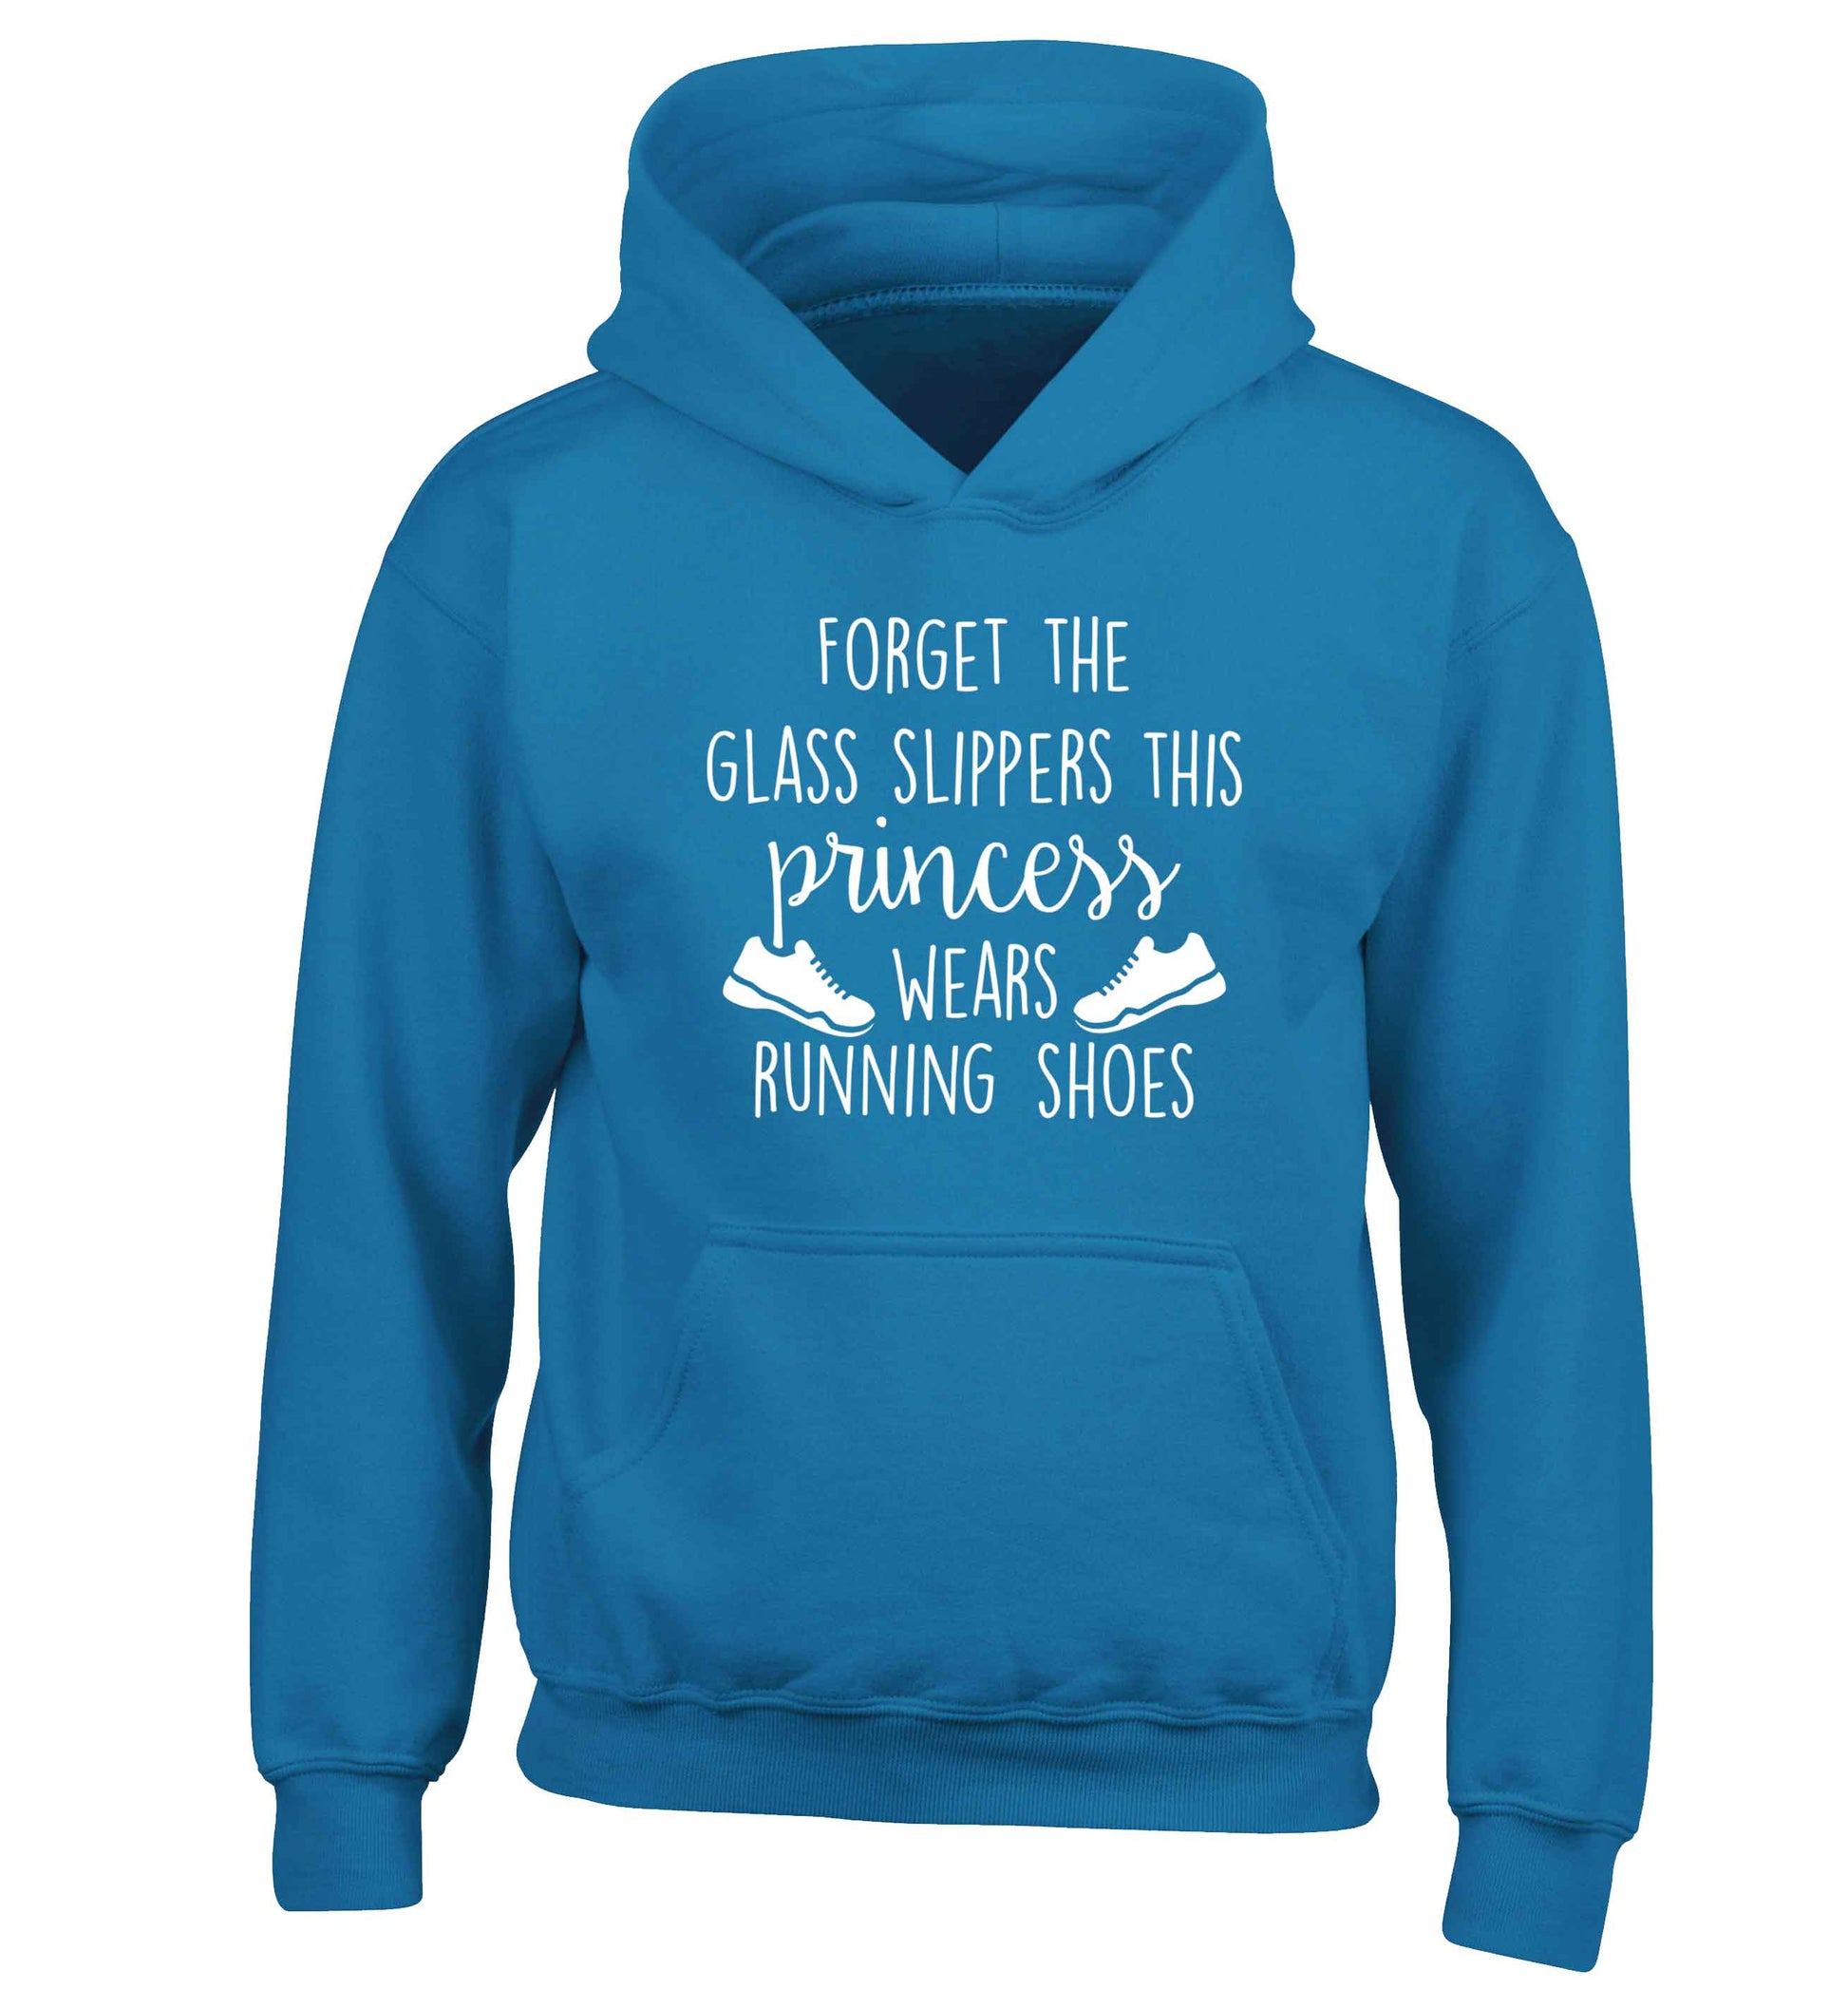 Forget the glass slippers this princess wears running shoes children's blue hoodie 12-13 Years